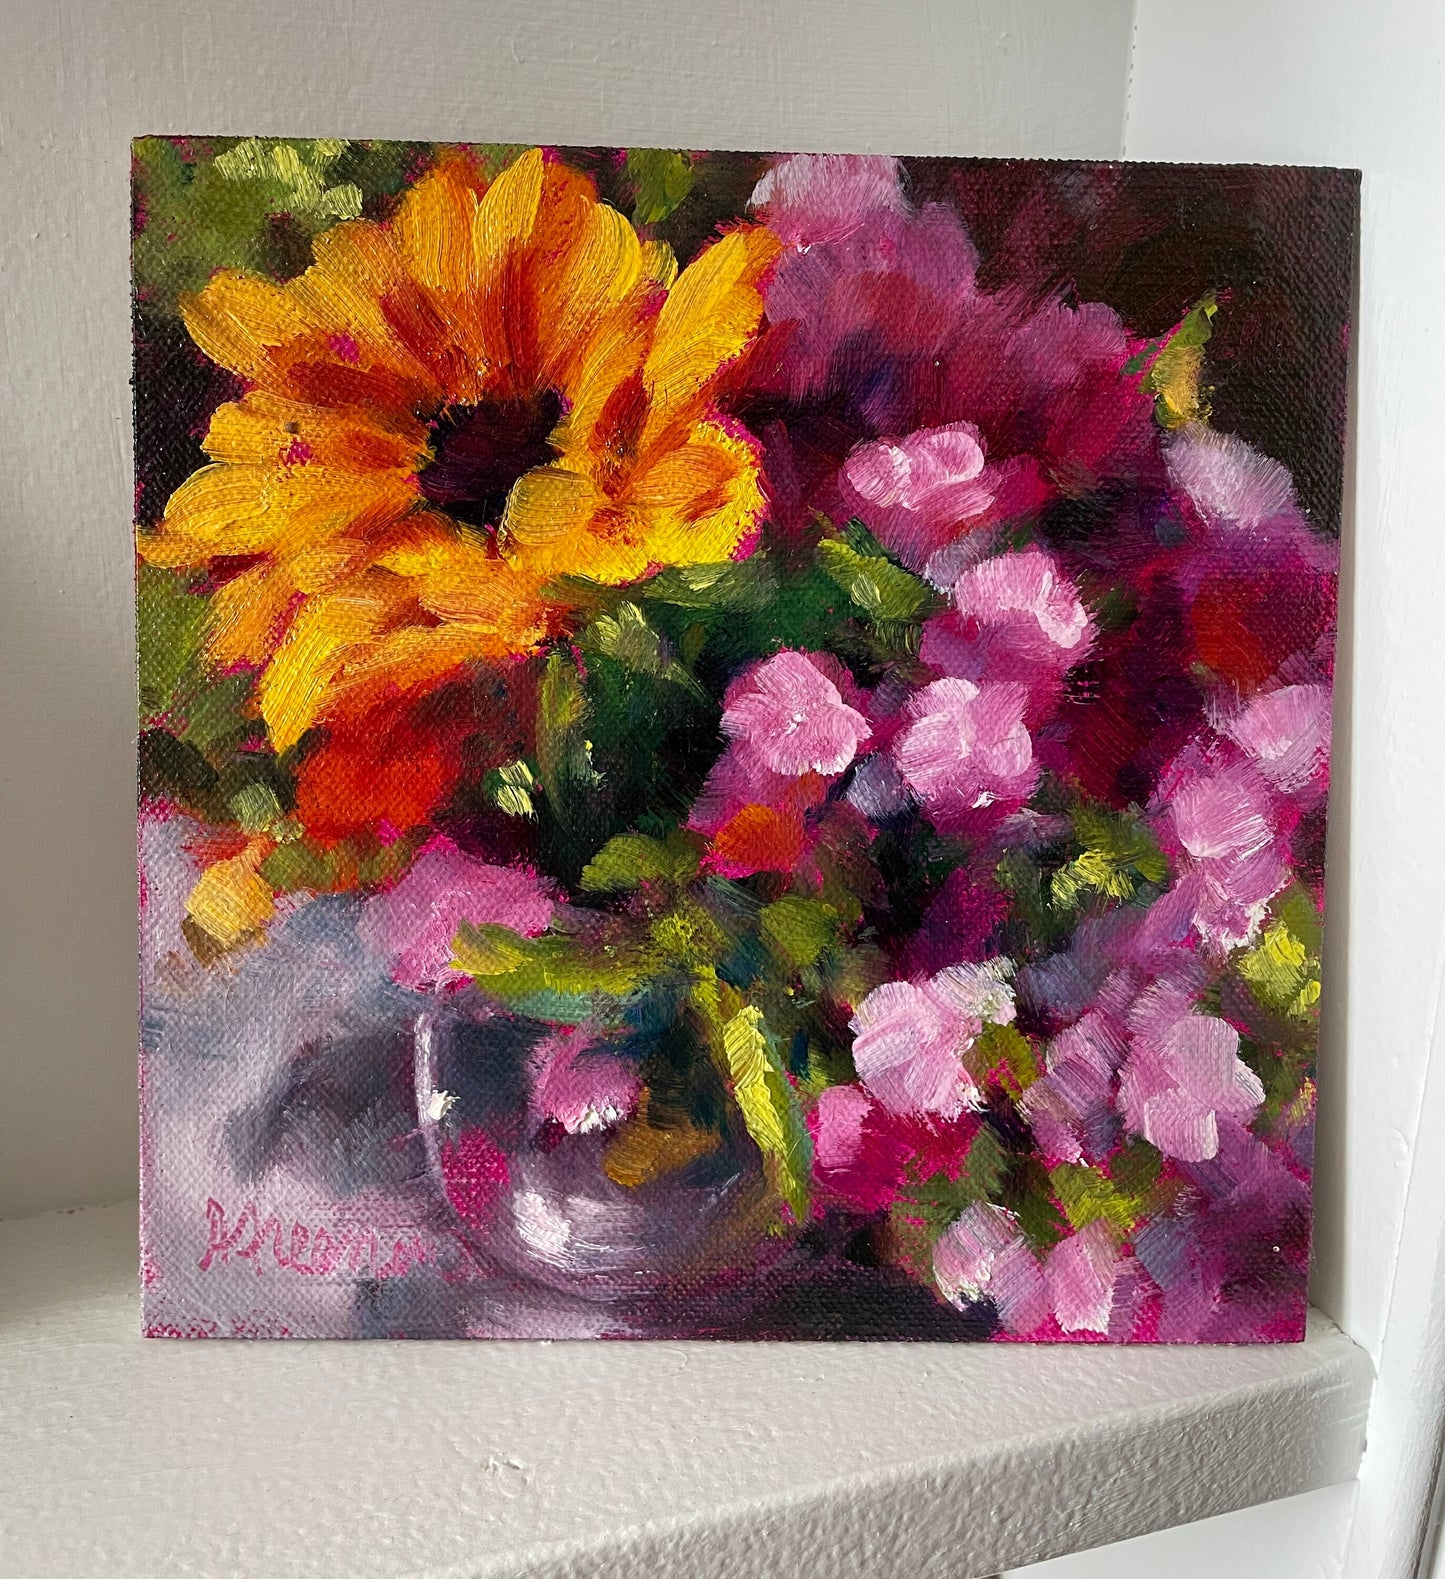 Sunflower and Purple Floral Painting, 6x6 Original Oil Painting, Unframed